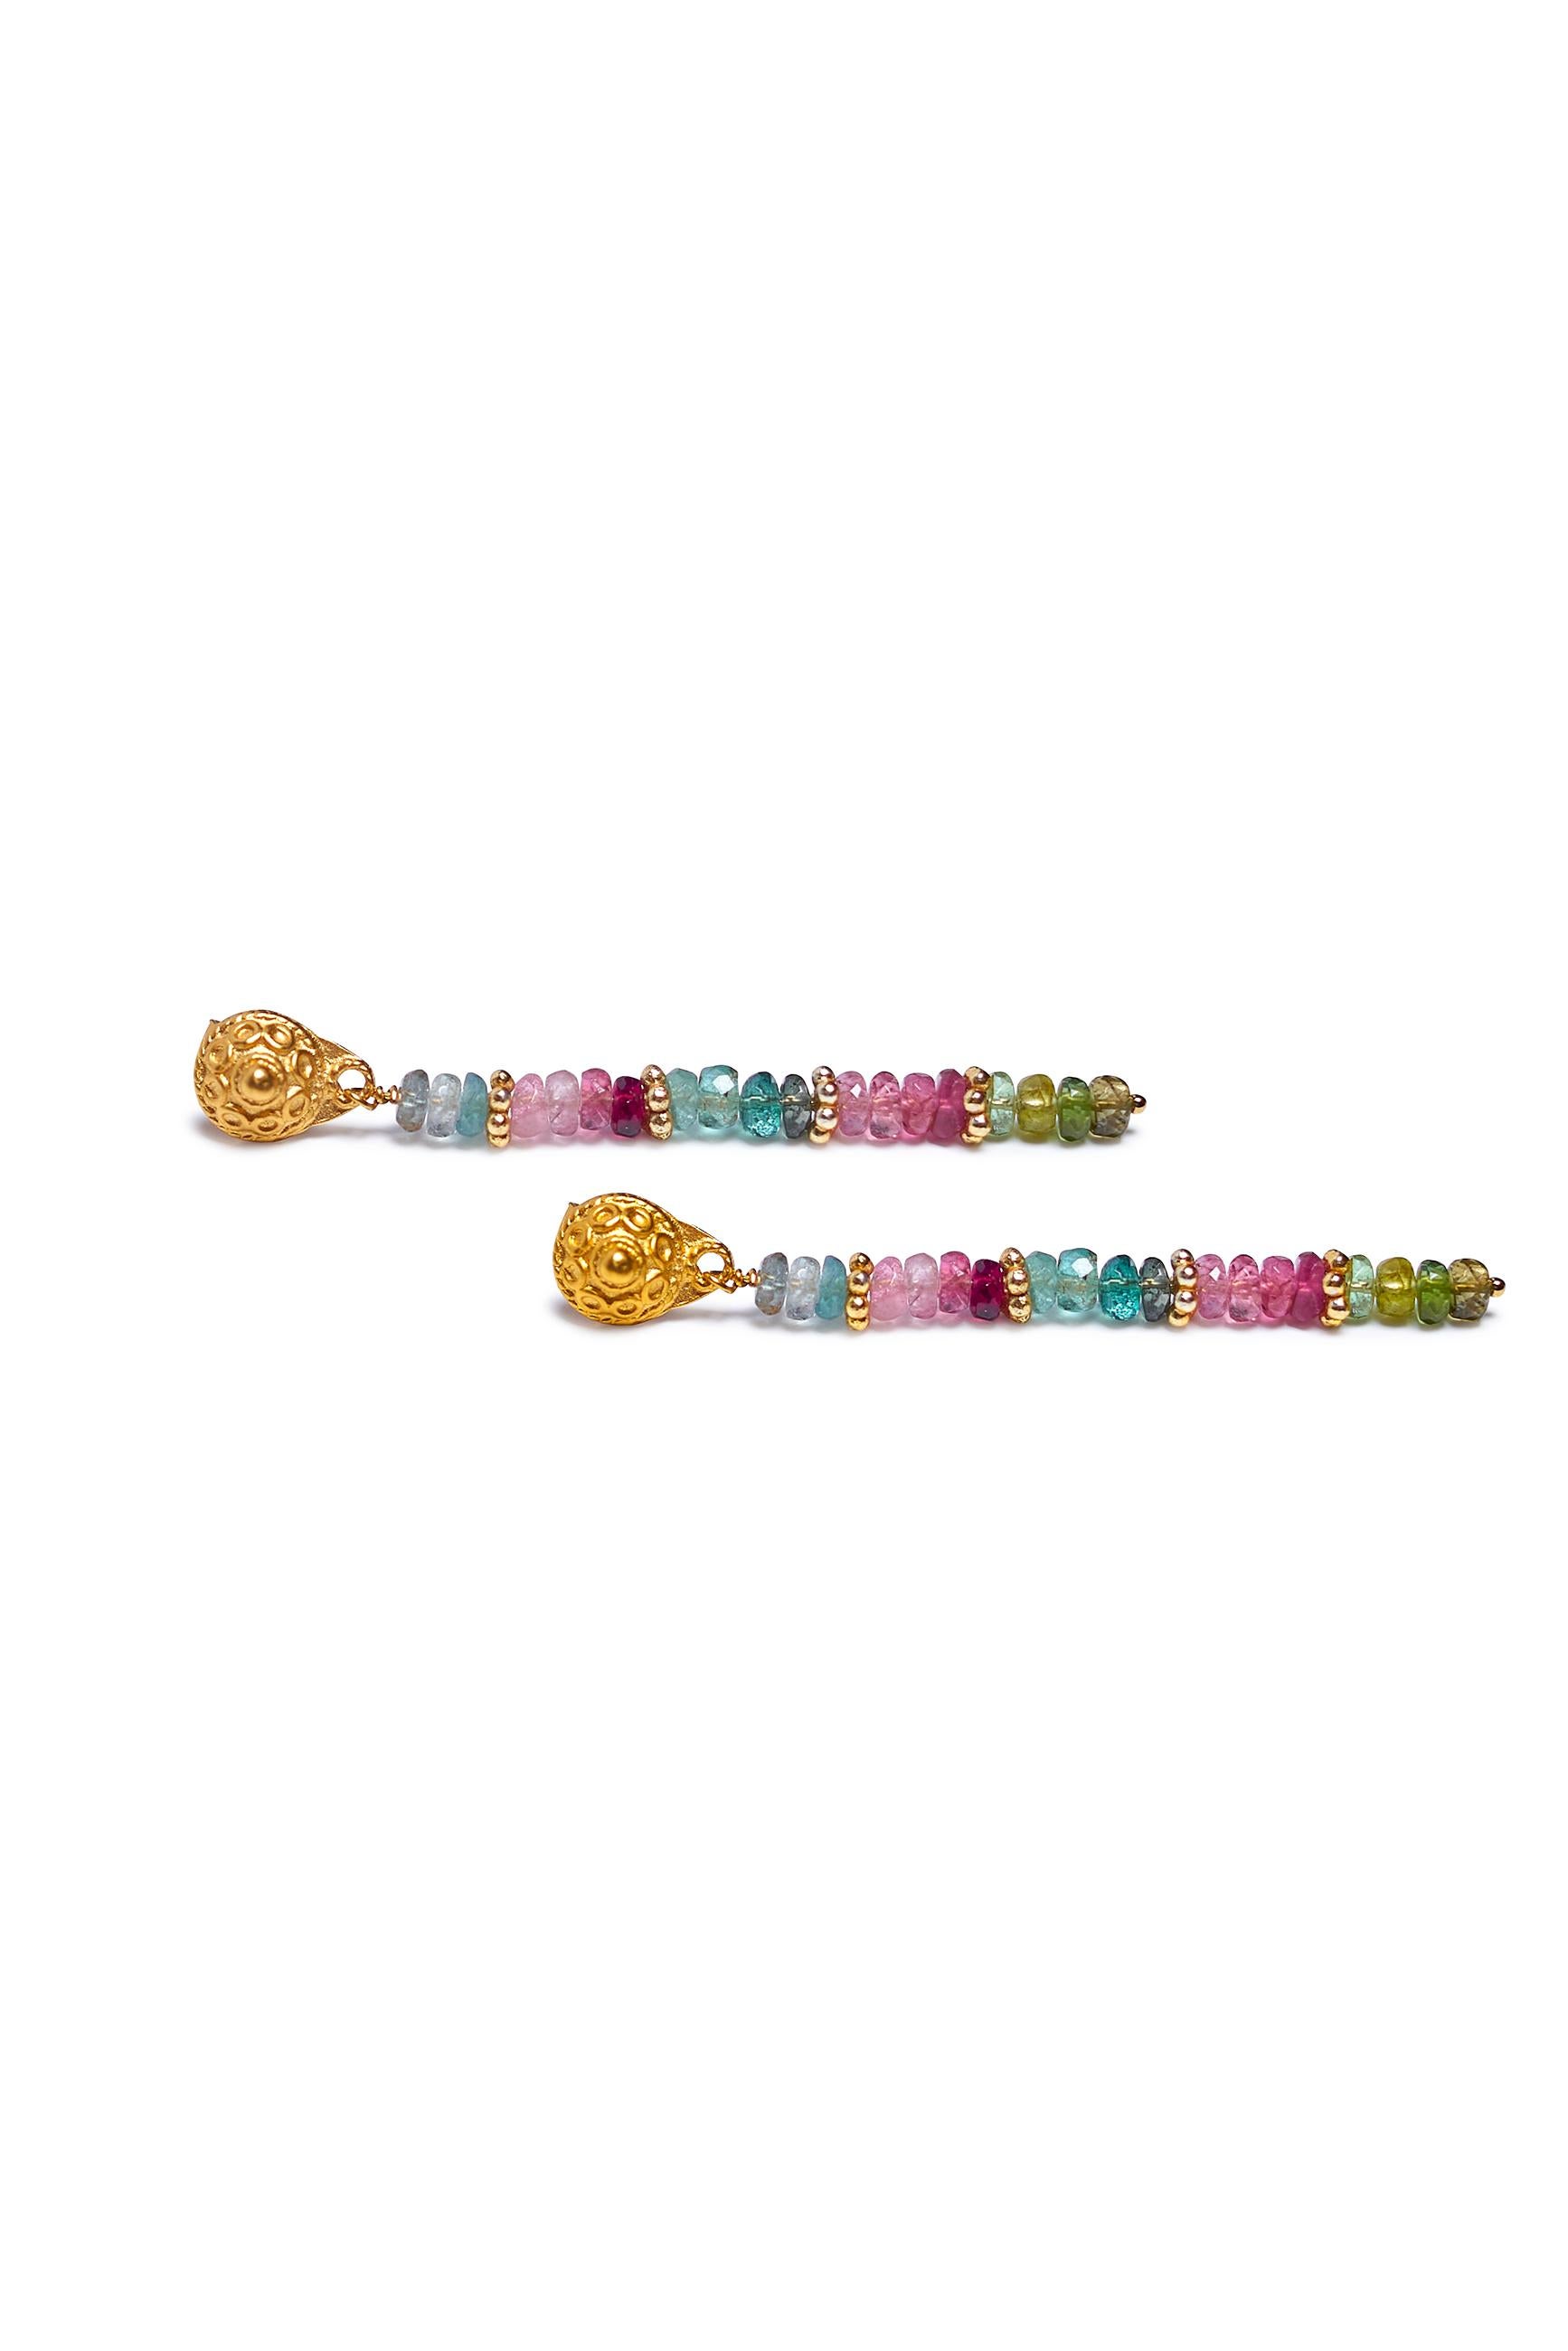 Story Behind the Jewelry
﻿Our Rainbow Kaleidoscope earrings are thoughtfully designed with tapering rainbow colors.  The vibrant rainbow tourmaline celebrates the beauty of a rainbow.  As the rains and storms are clearing, sunlight and rainbows